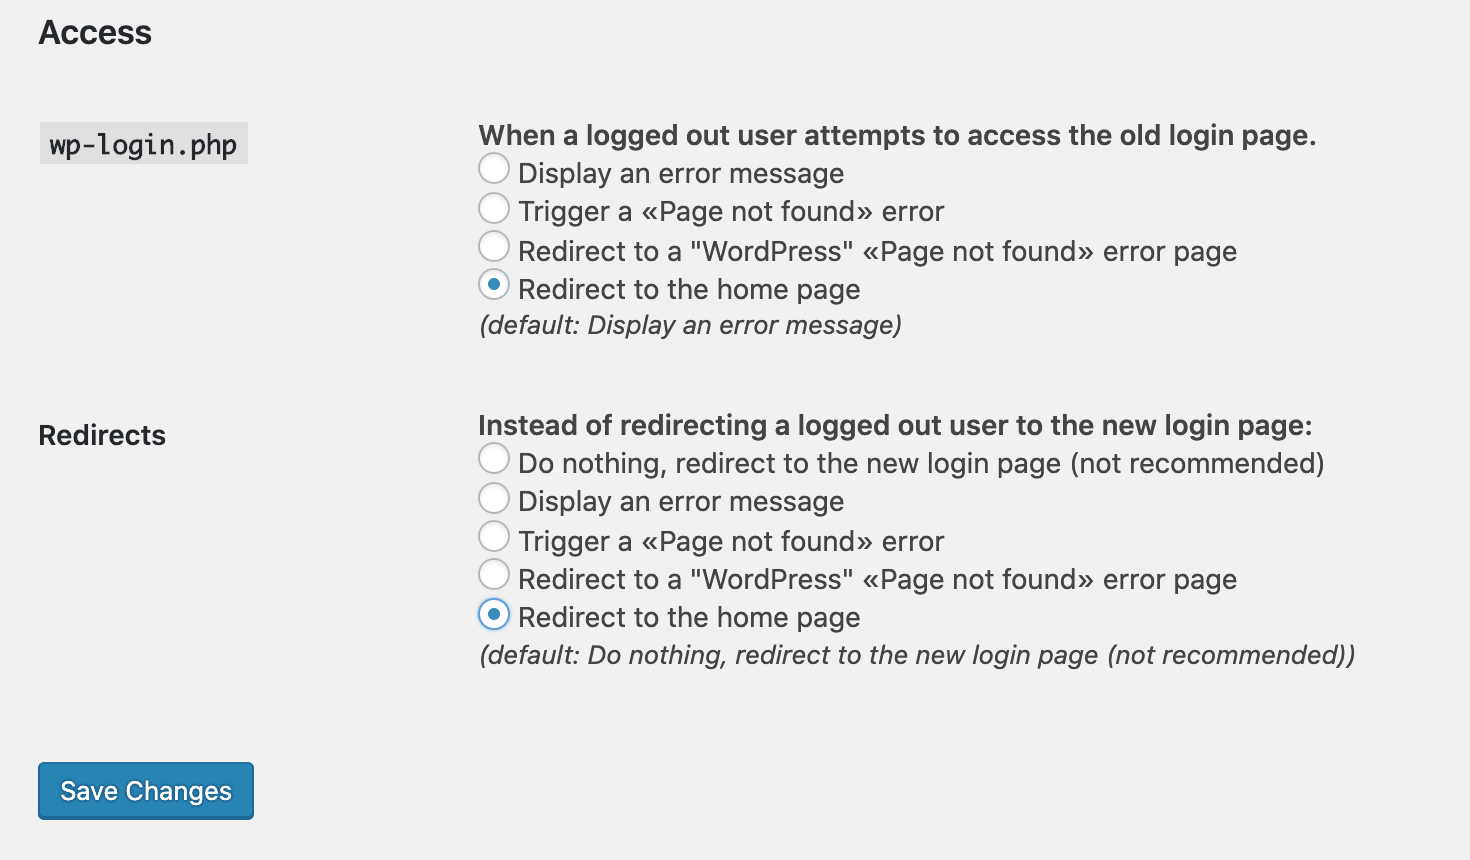 Customization of redirections and error messages of the Move Login plugin